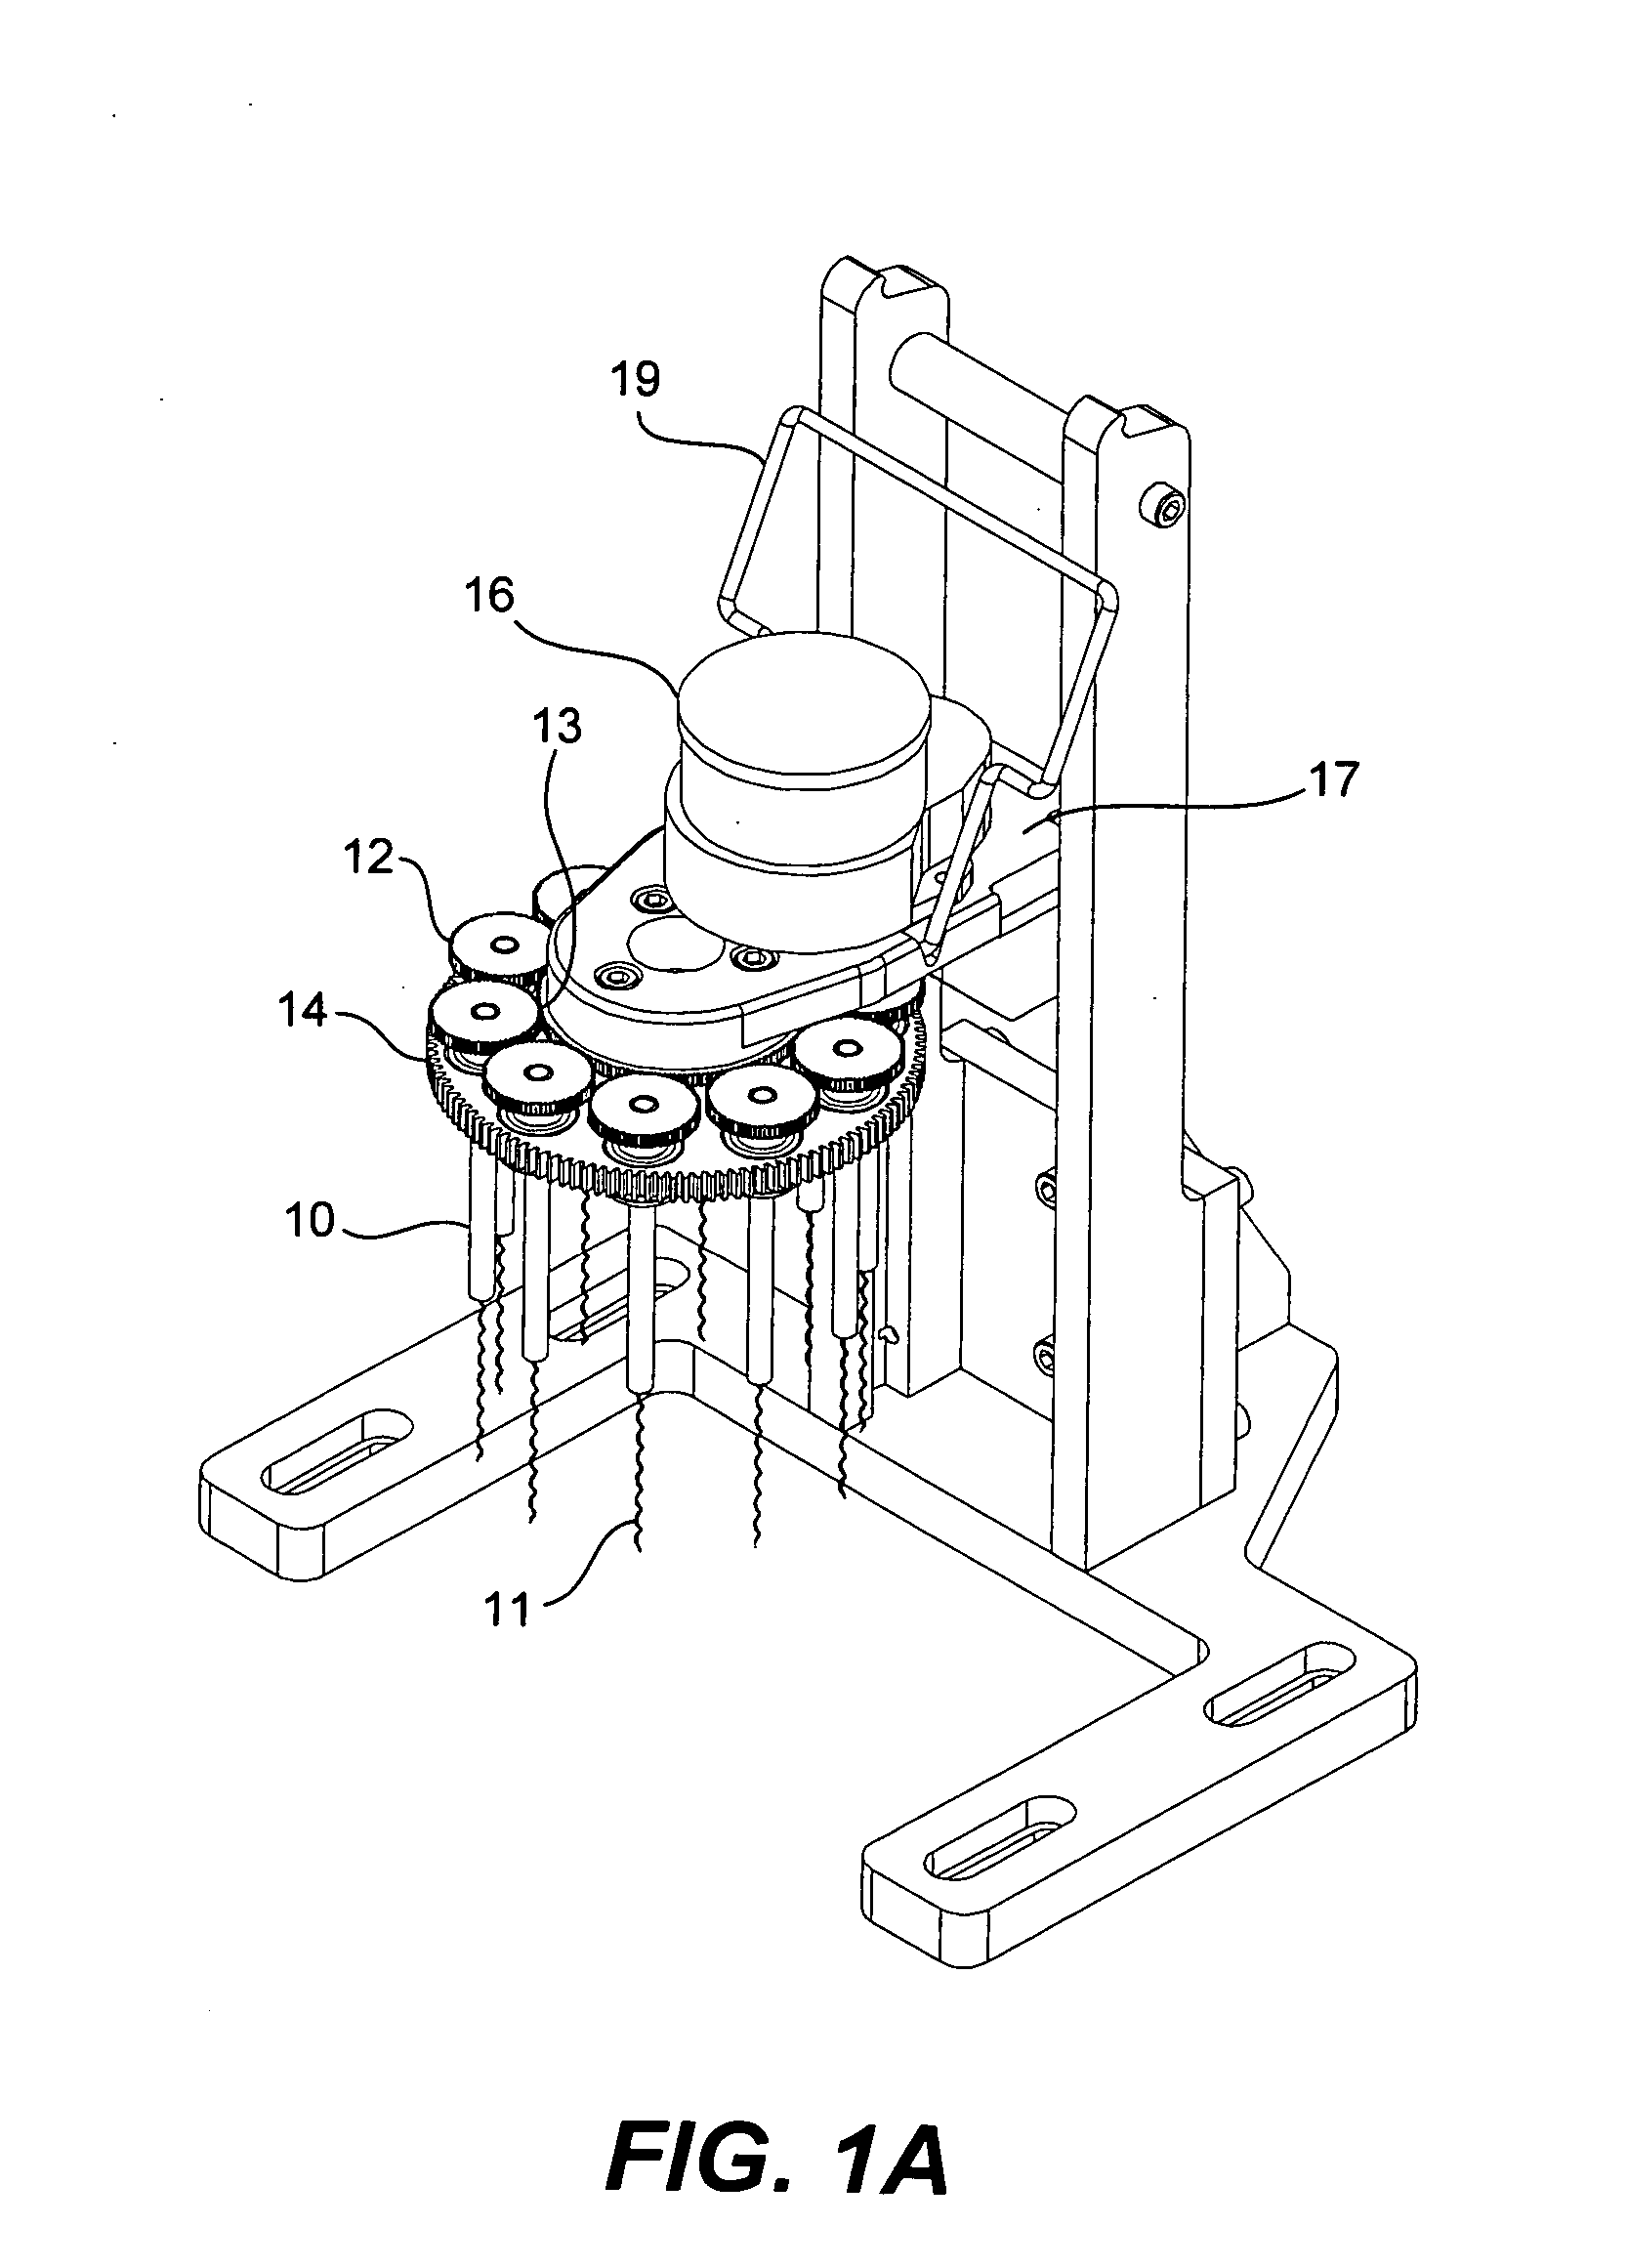 Method and apparatus for electropolishing metallic stents